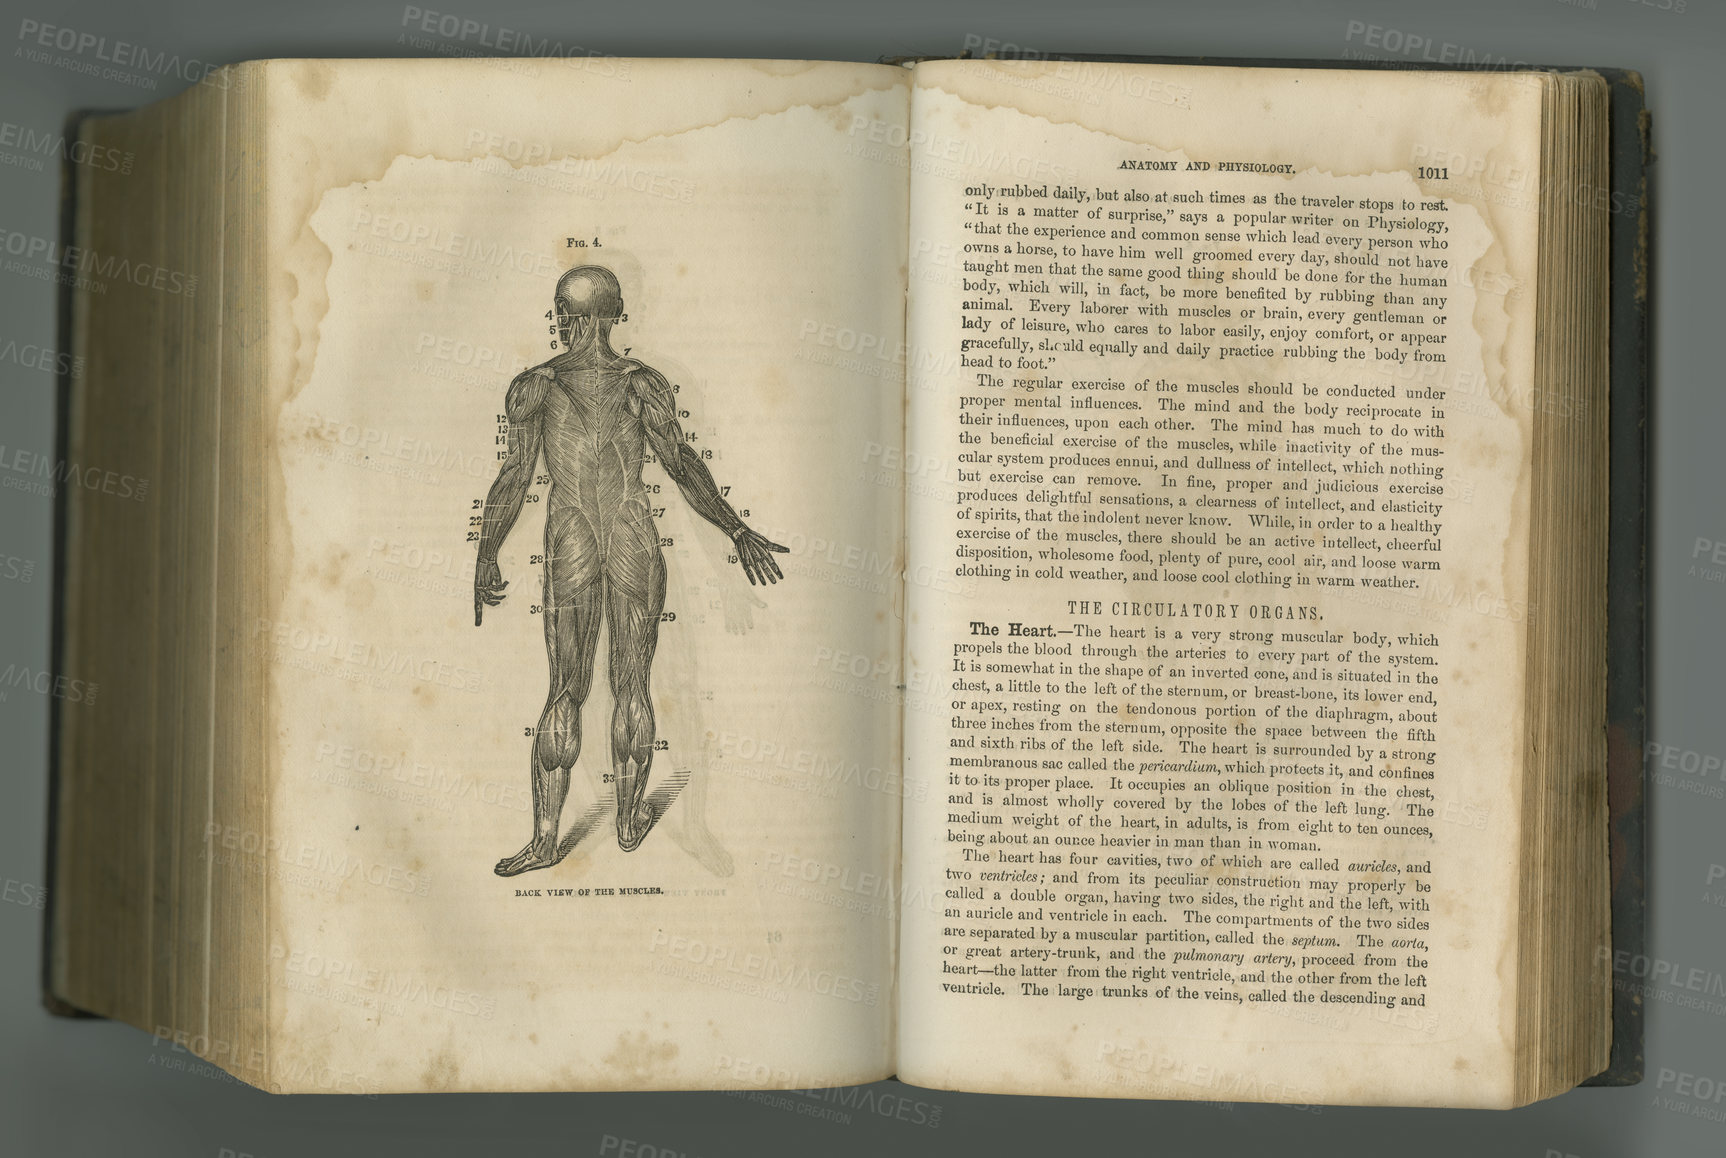 Buy stock photo Old book, vintage and anatomy of human body in literature, manuscript or ancient scripture against a studio background. History novel, journal or figure for the study of muscle, medicine or organs